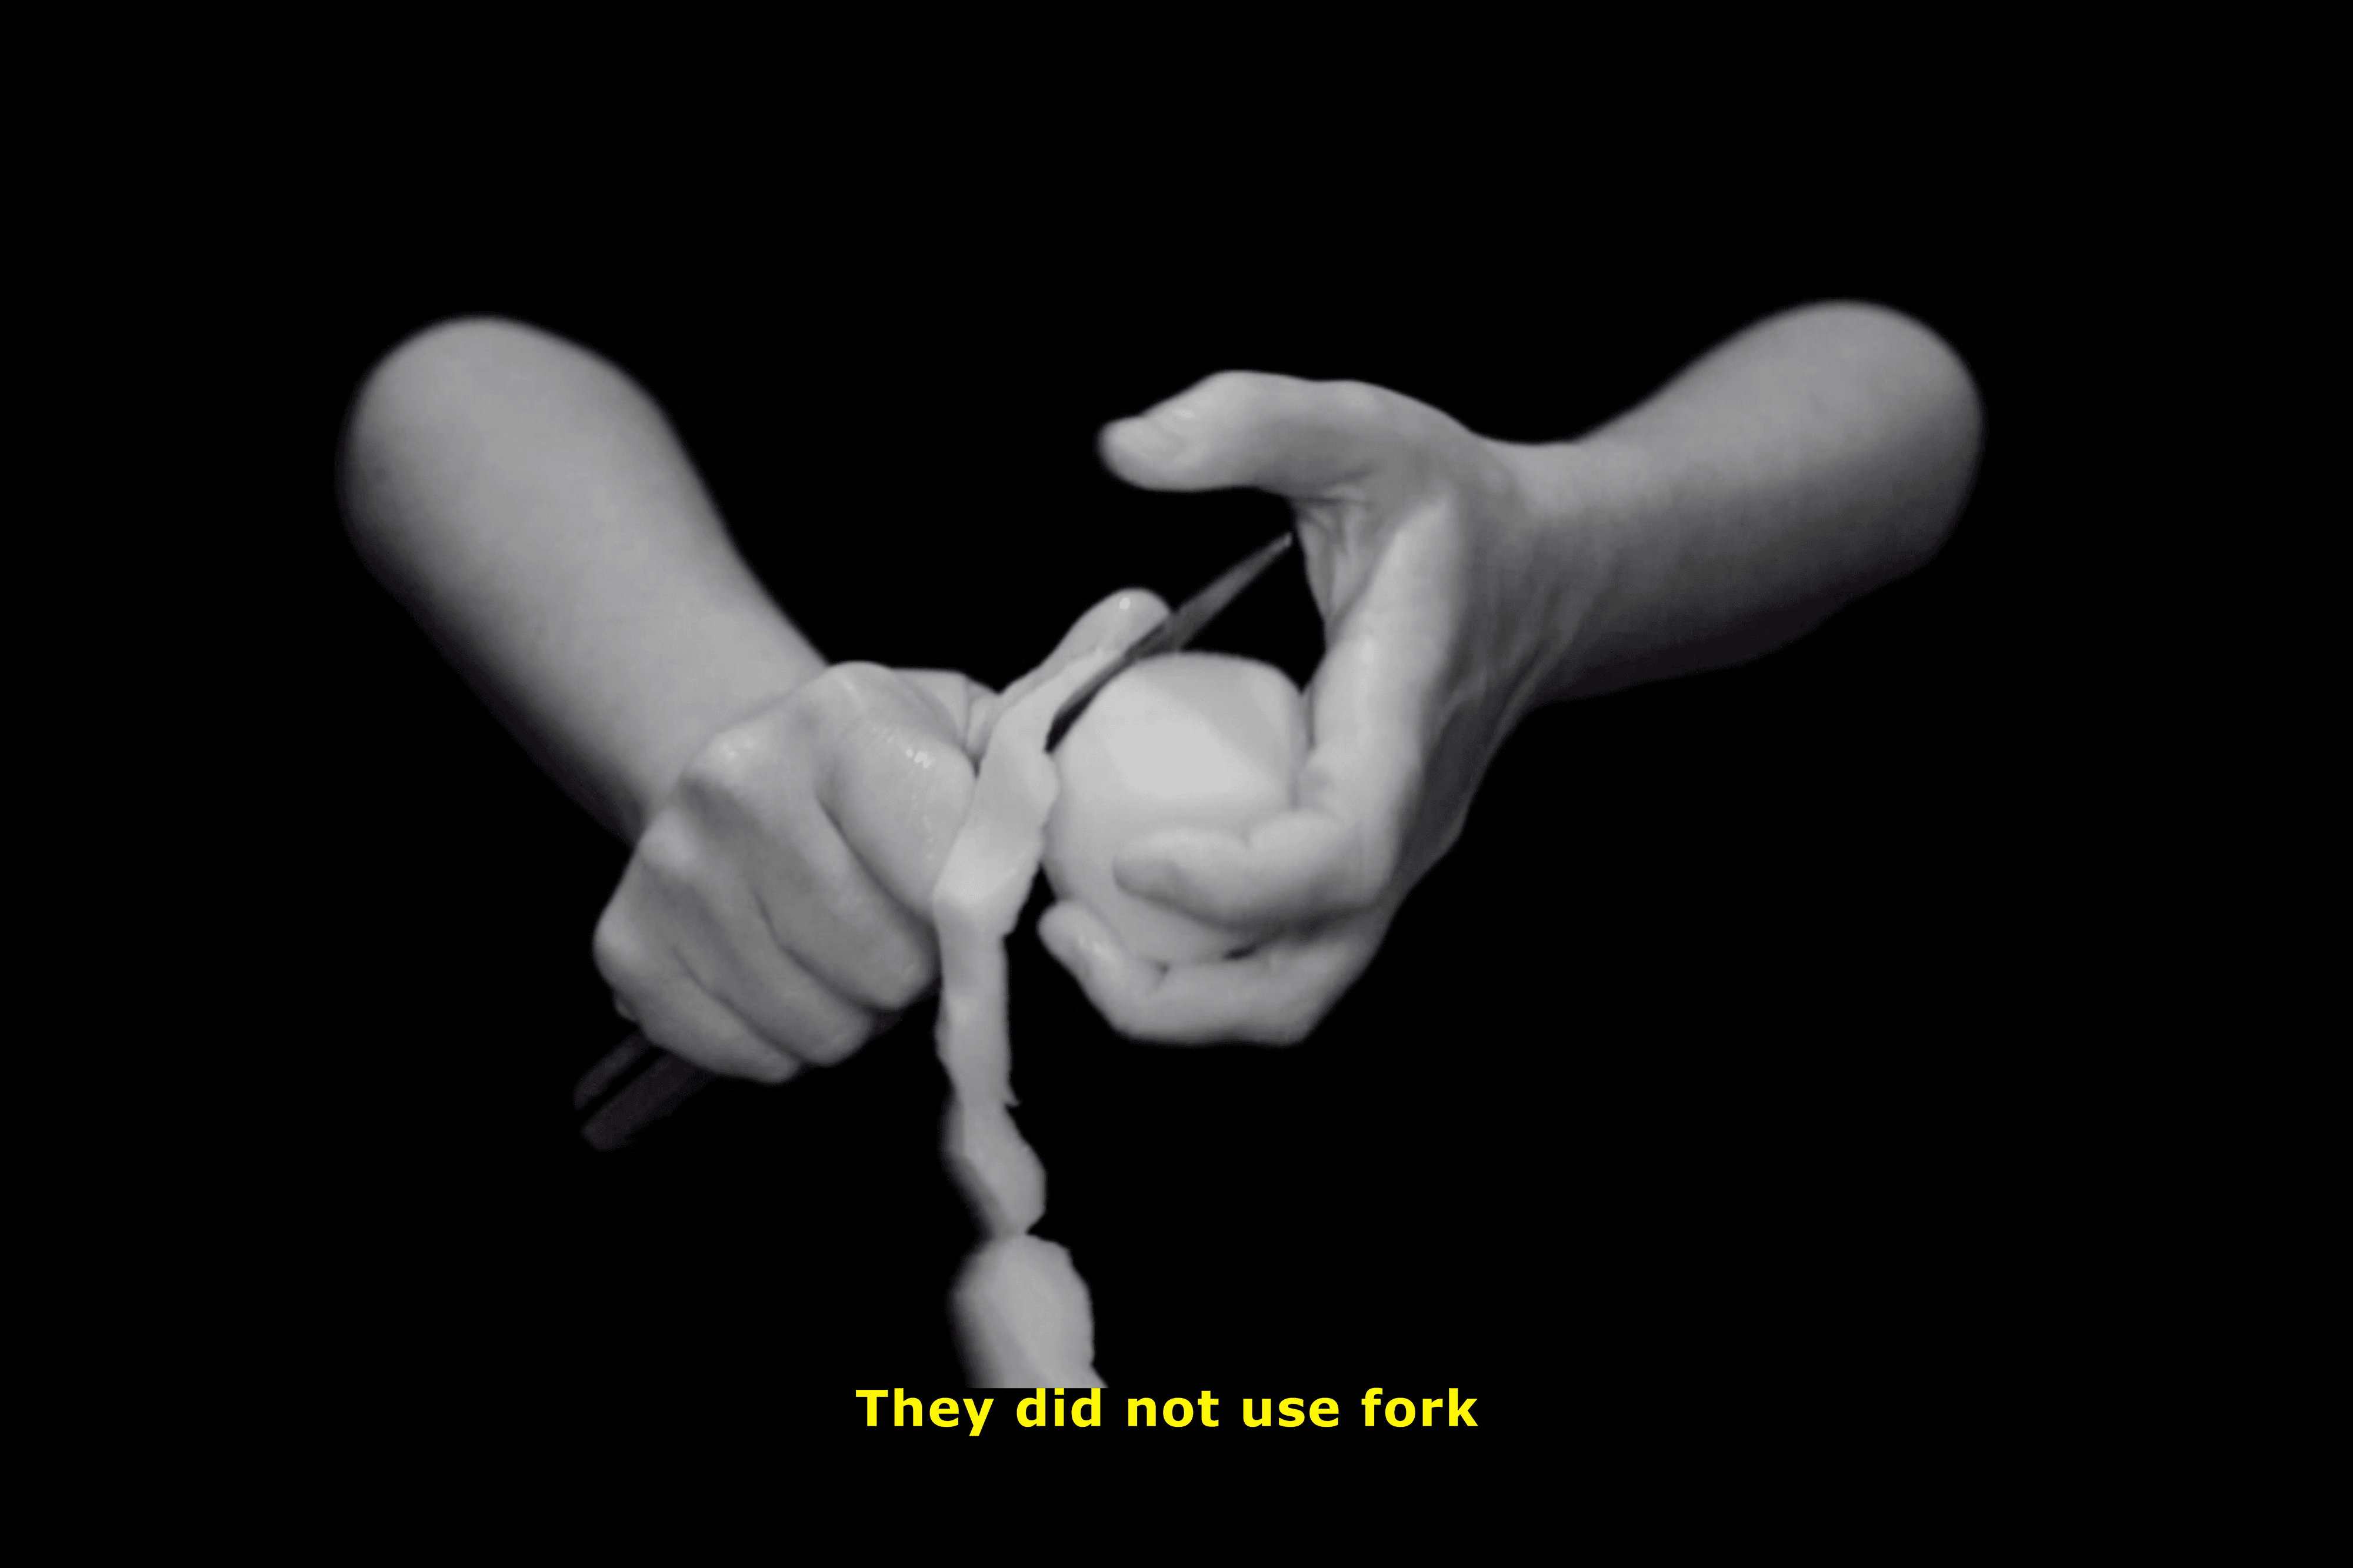 They did not use fork